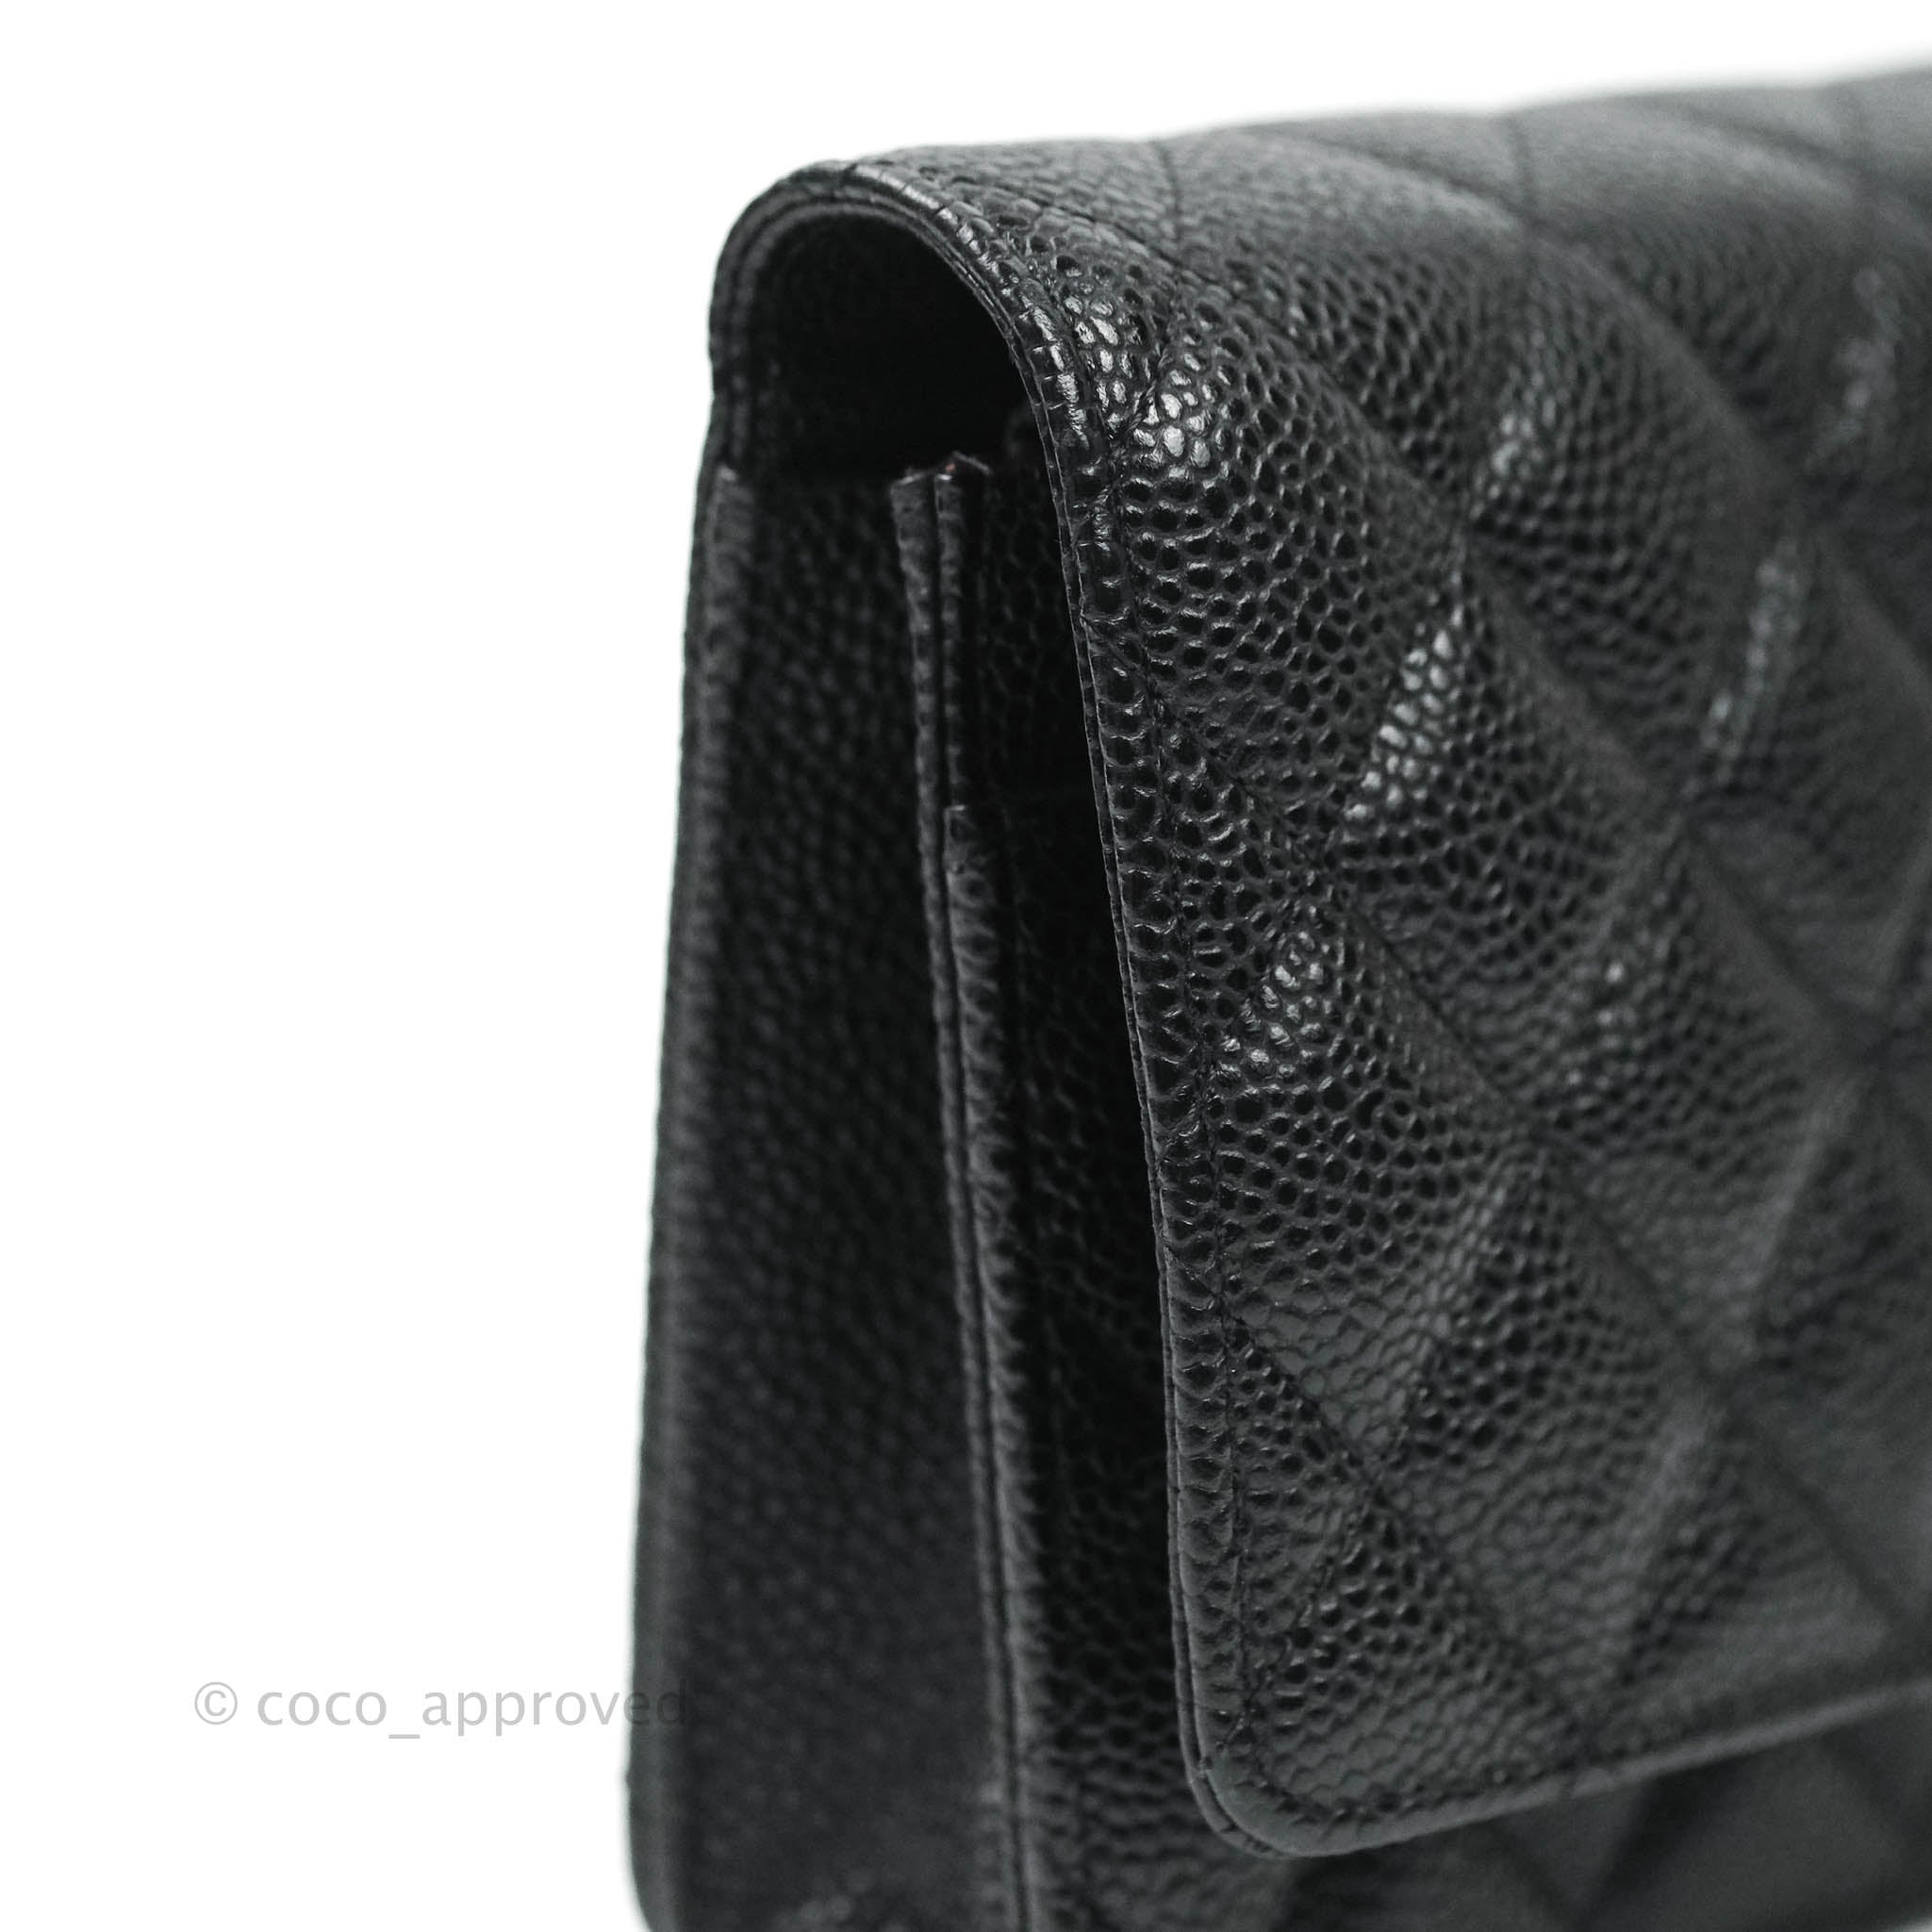 Chanel Caviar Chevron Quilted Wallet On Chain WOC Black